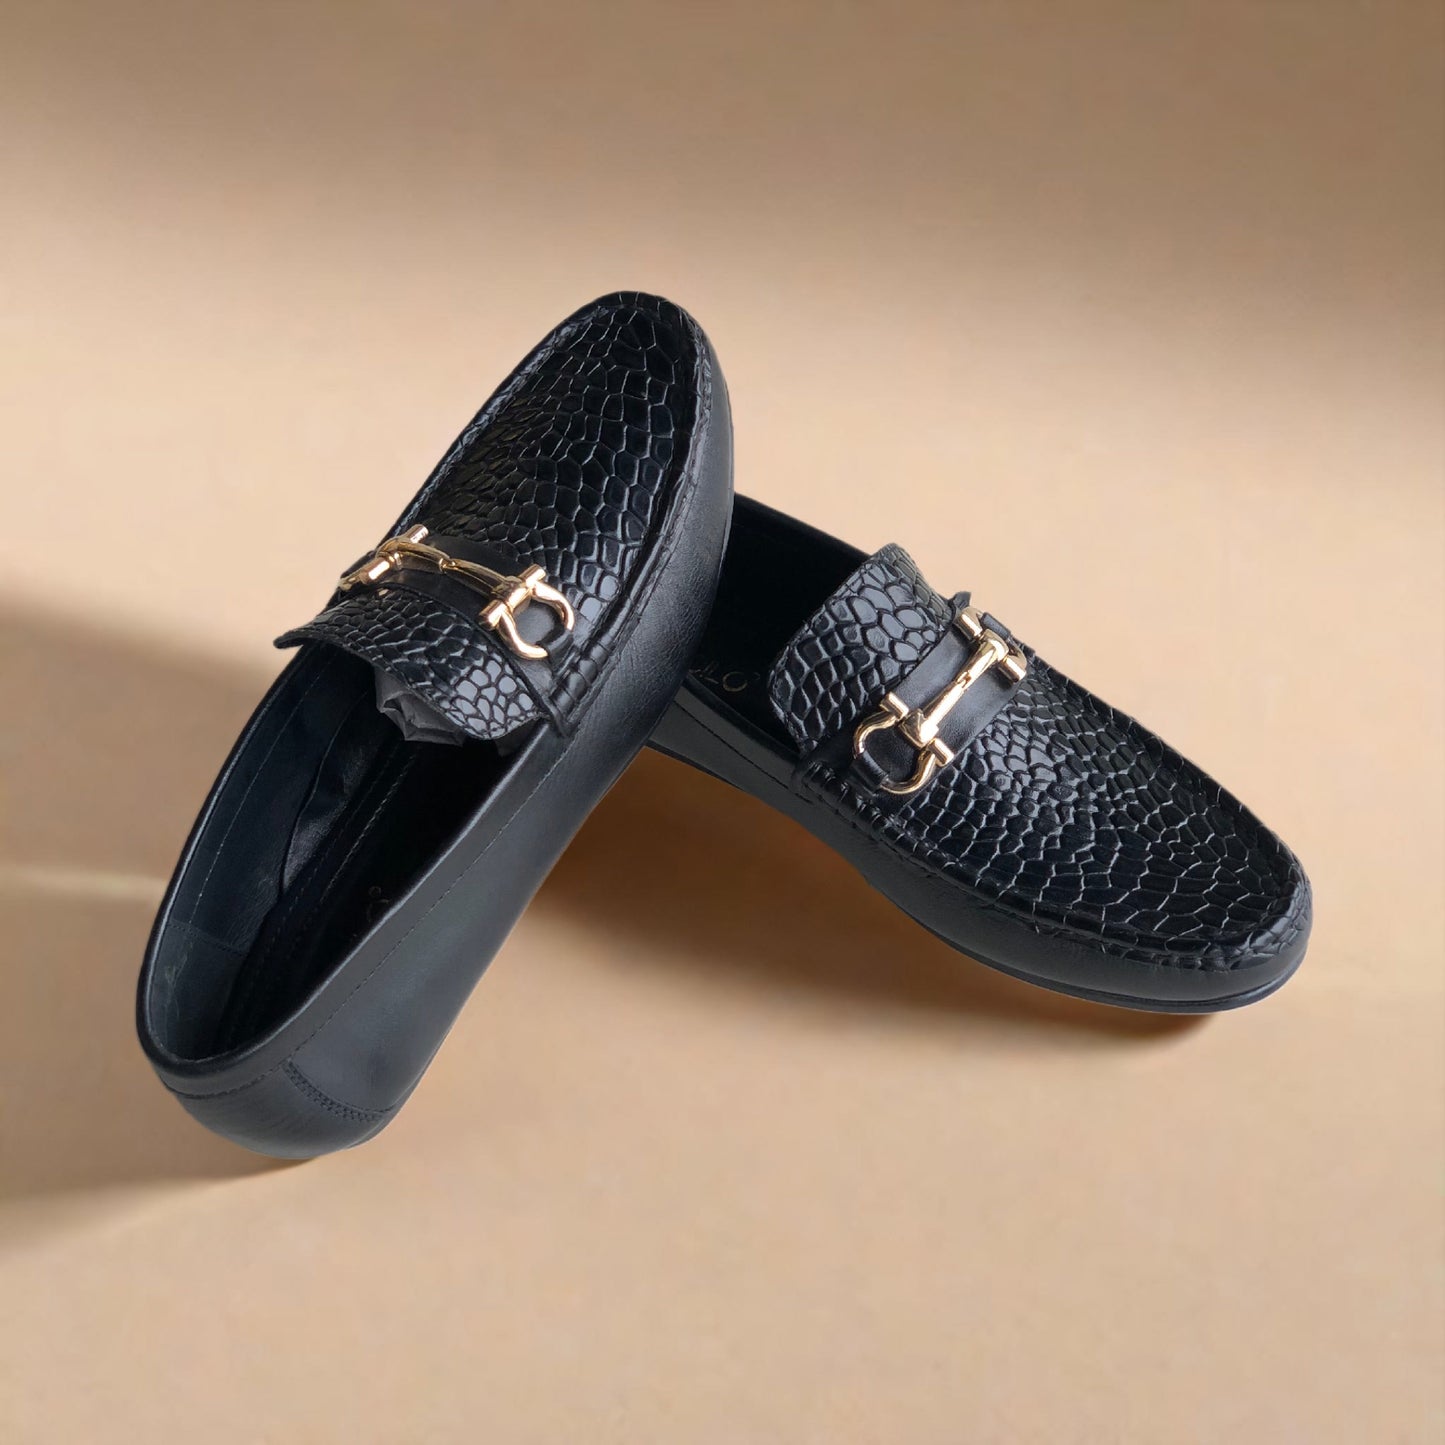 Black Croc Driving Loafers